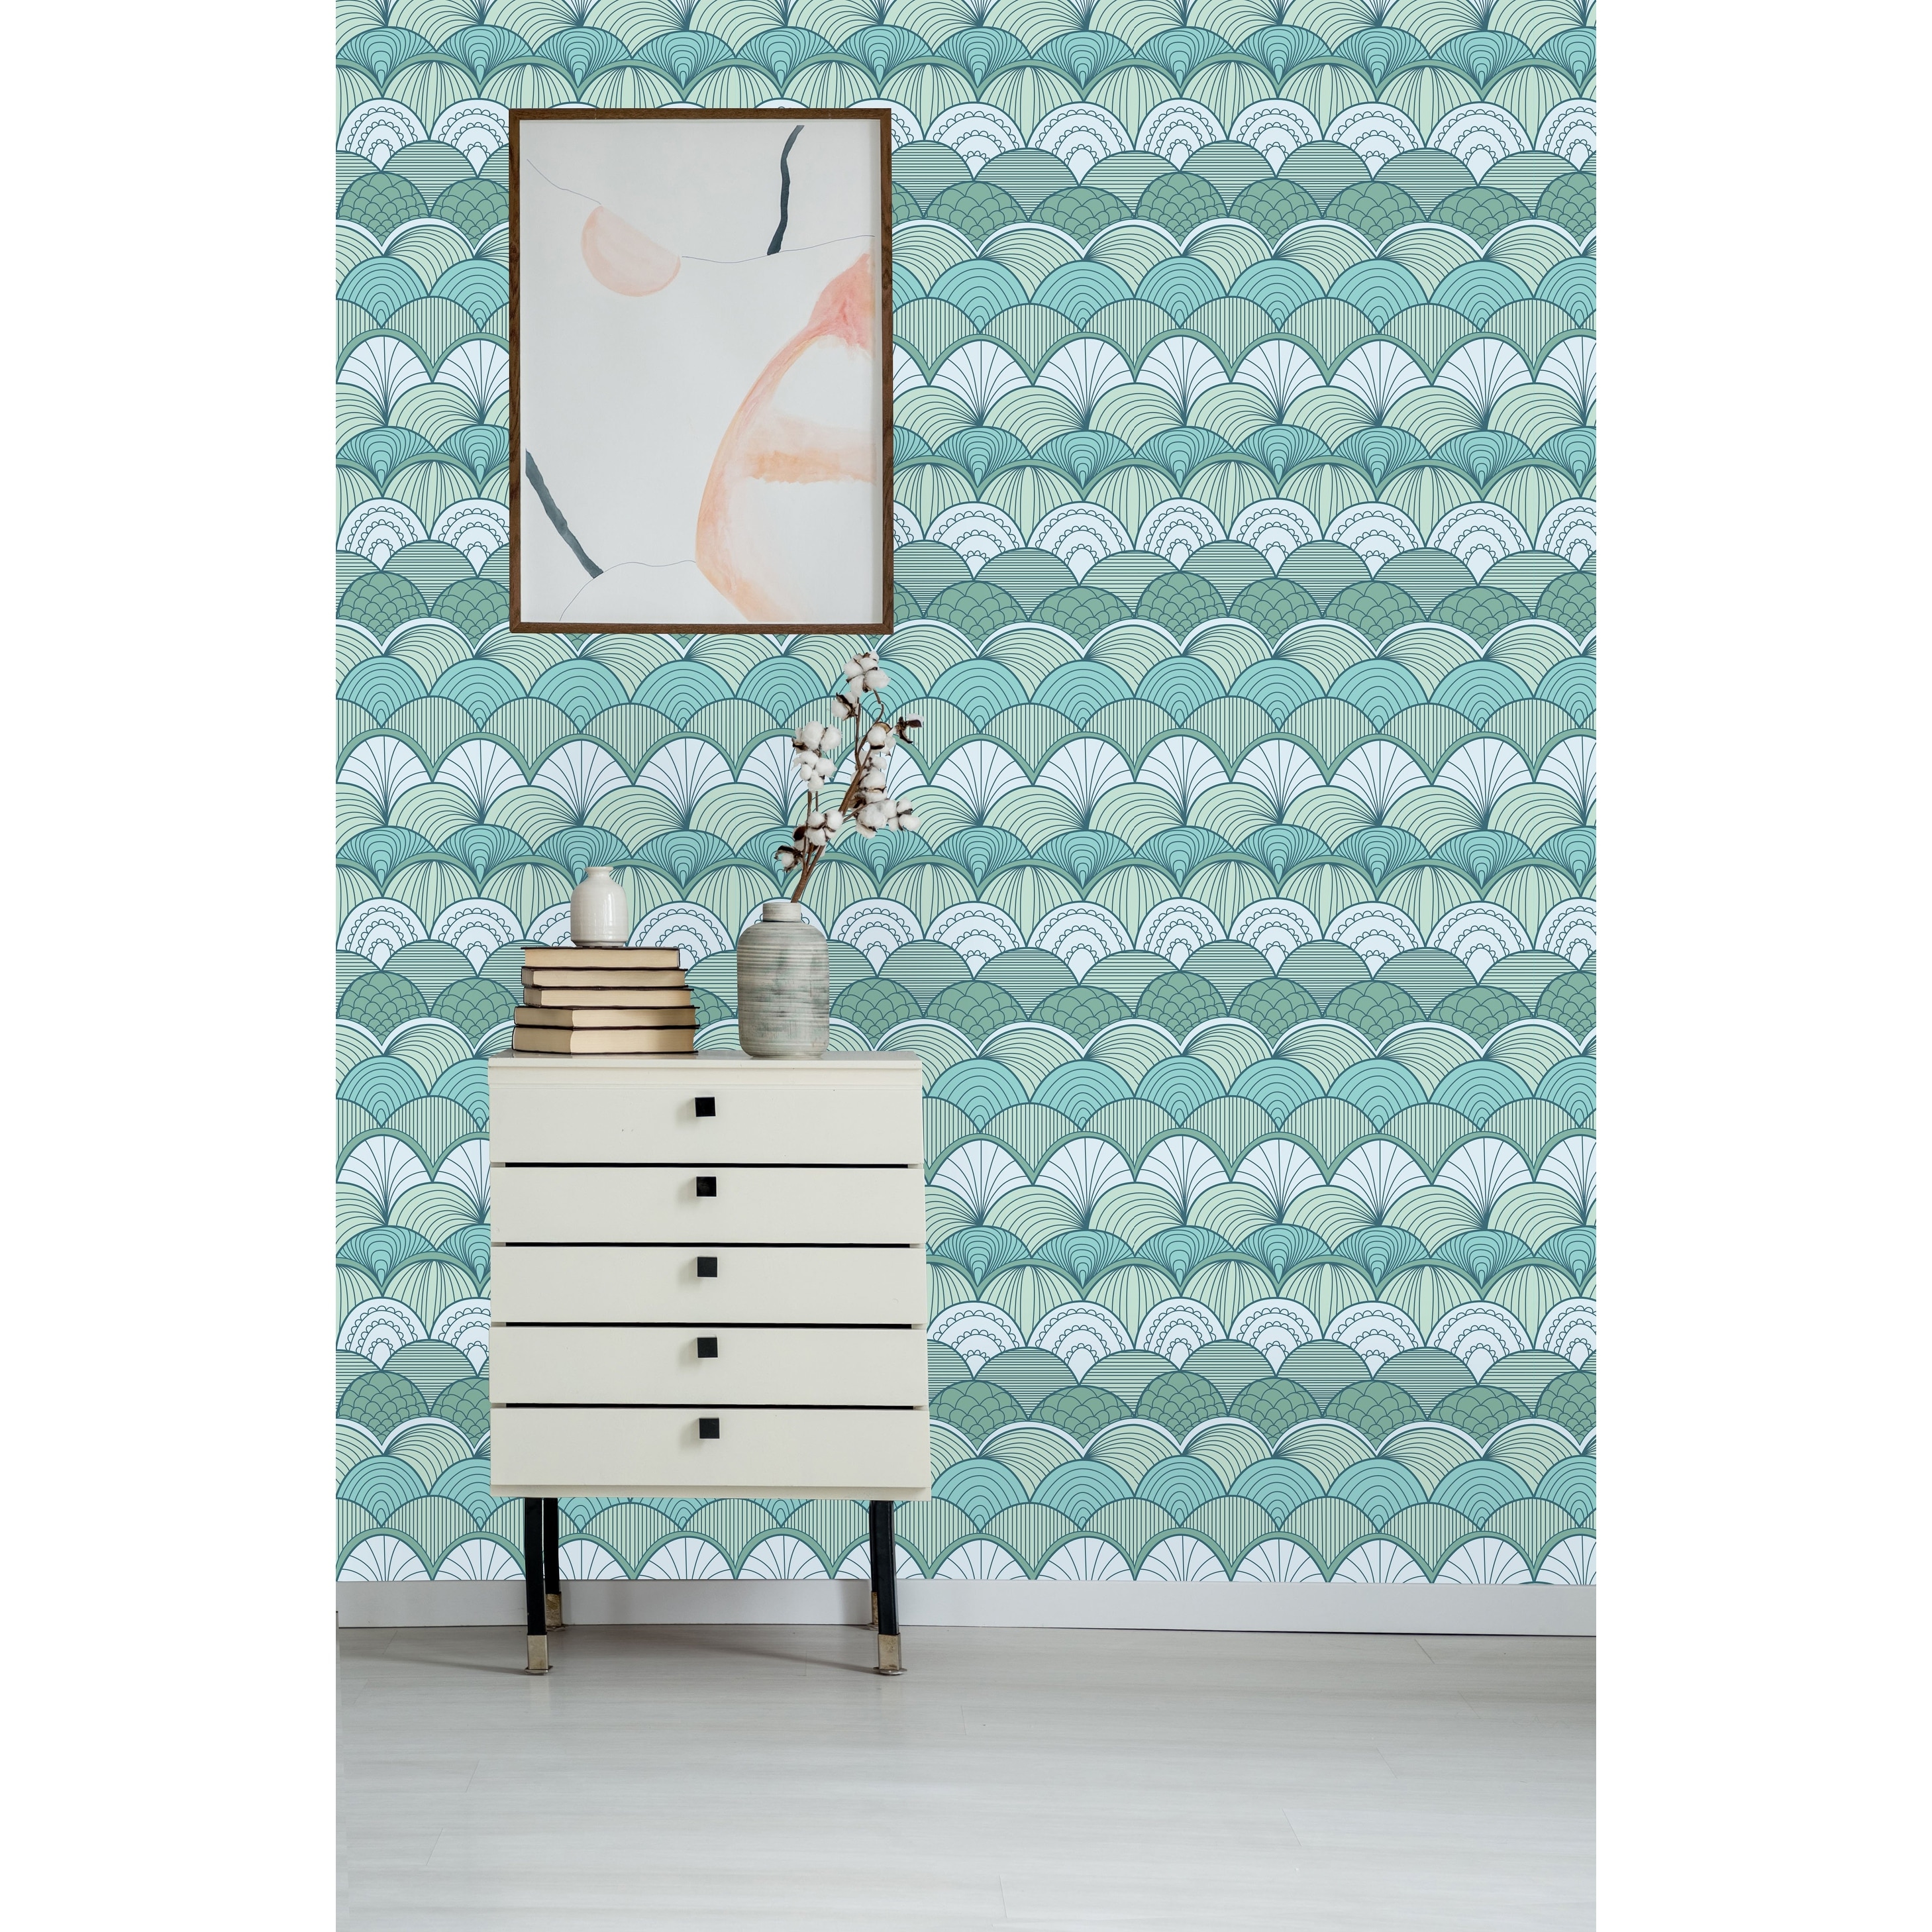 https://ak1.ostkcdn.com/images/products/is/images/direct/27d363ff09799e72f0f5afb7c98d6f02356a2908/Scallops-Pattern-Peel-and-Stick-Wallpaper.jpg